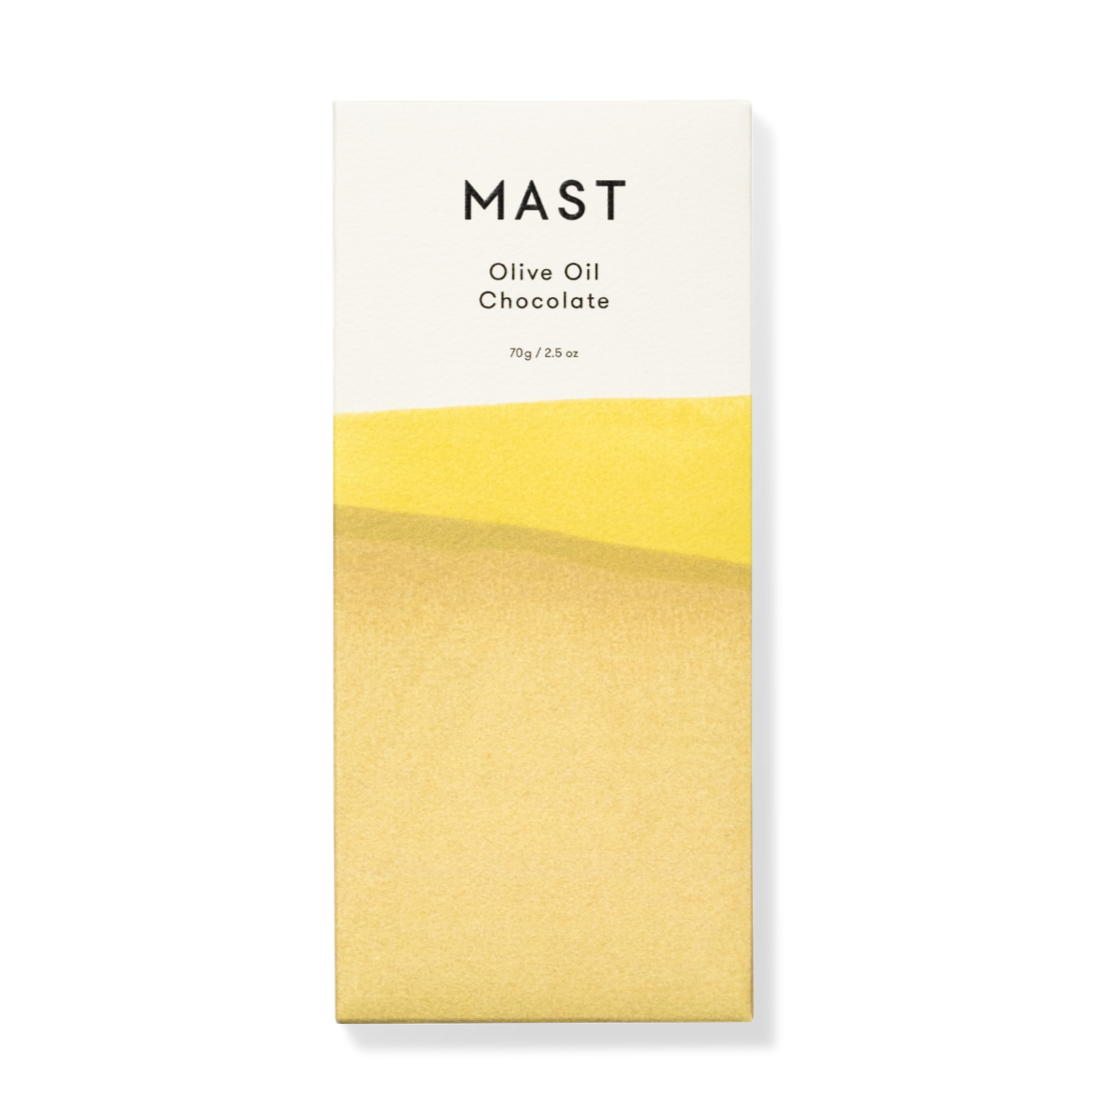 MAST - CLASSIC CHOCOLATE BAR IN OLIVE OIL